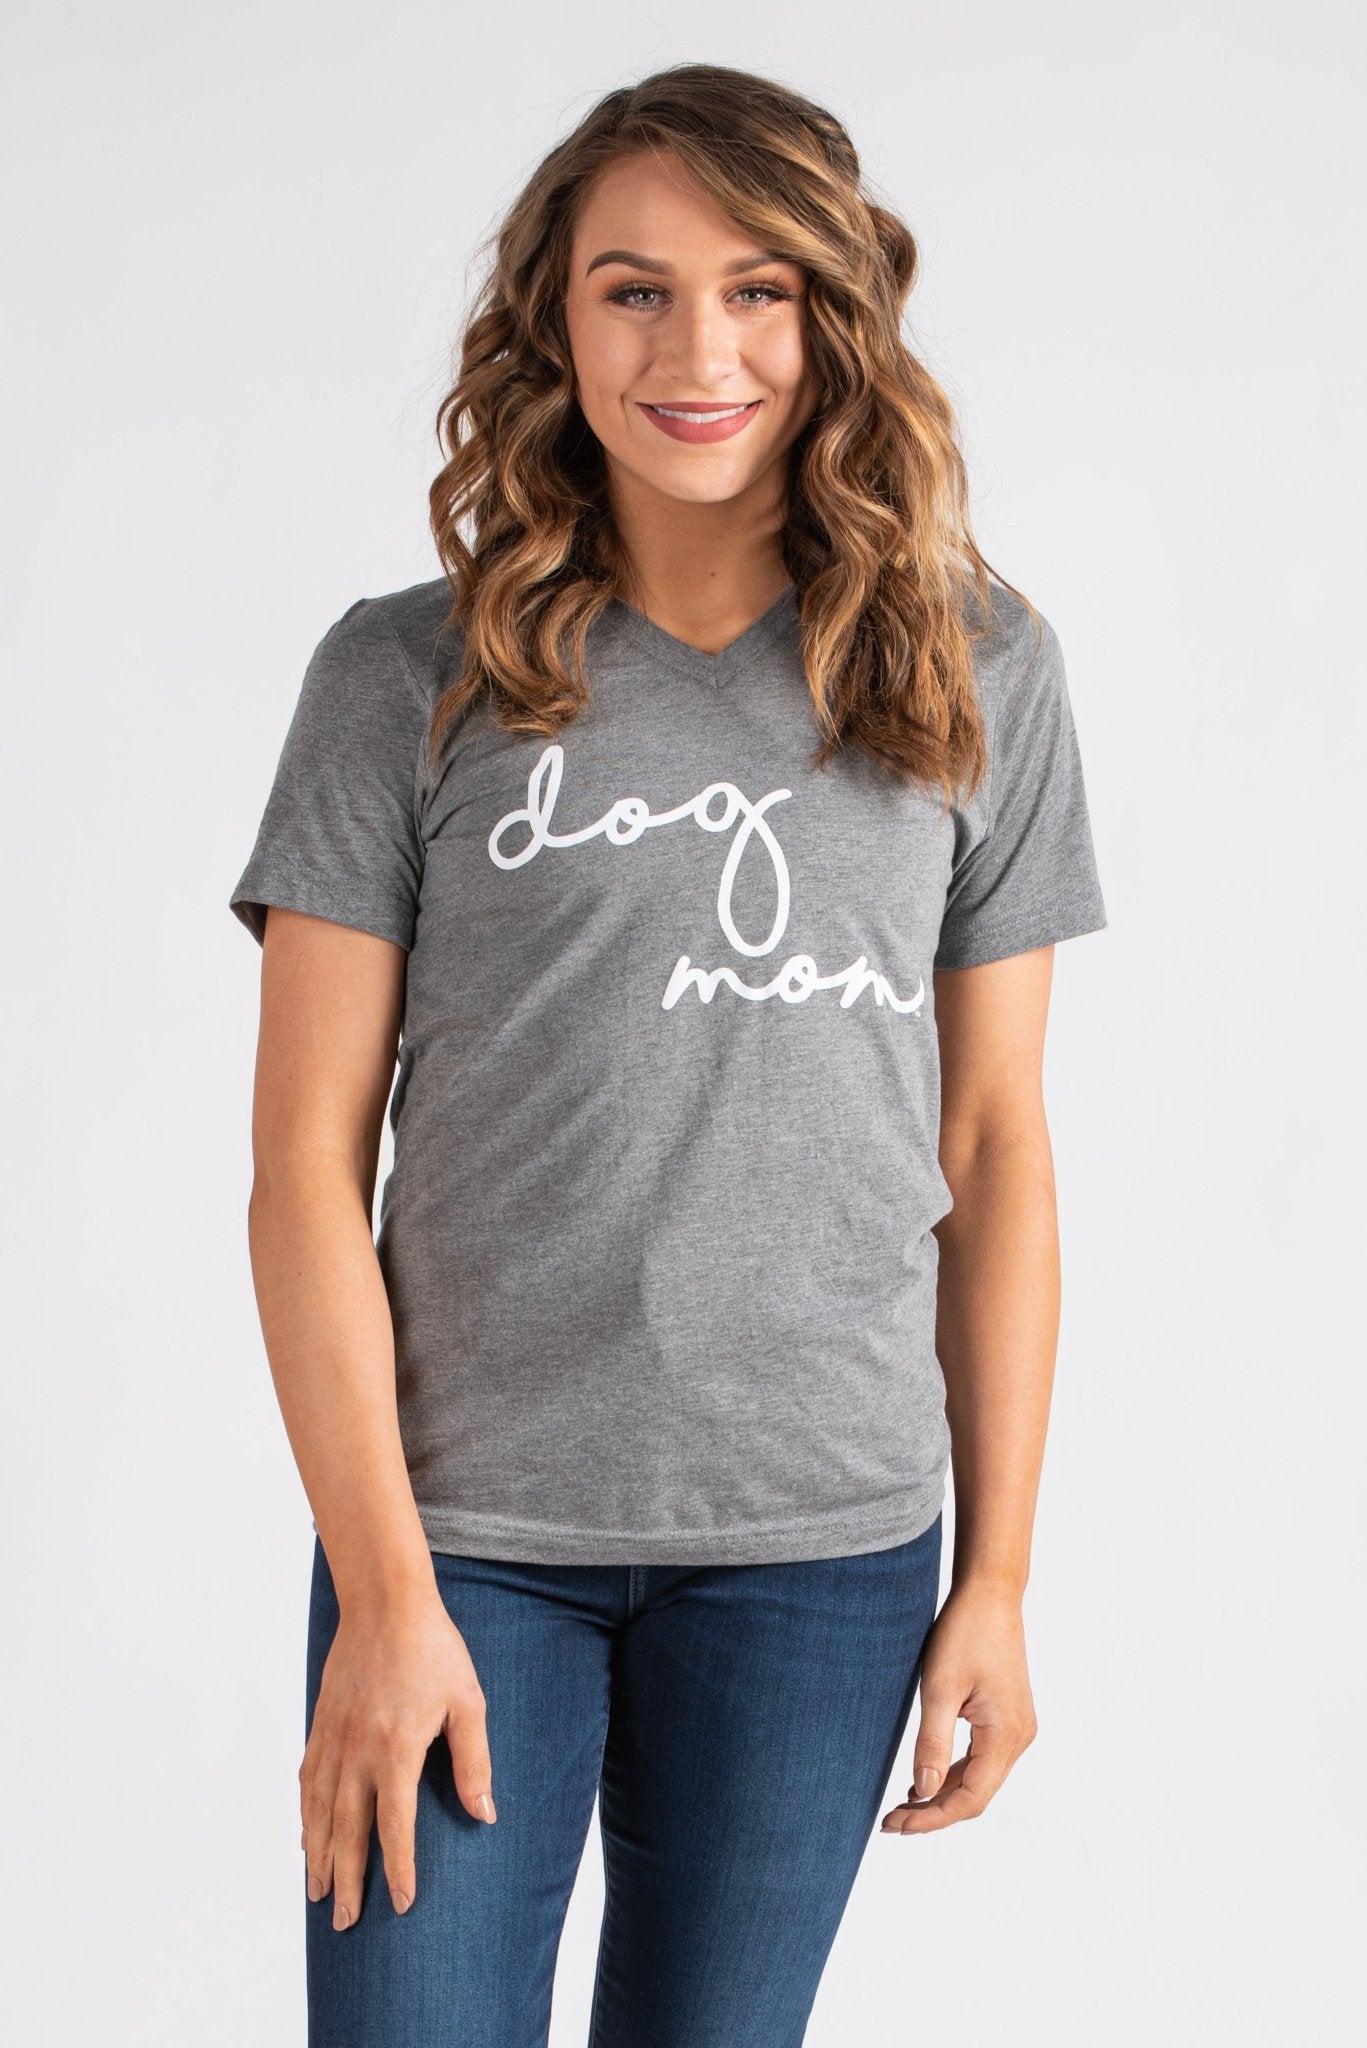 Dog Mom script unisex short sleeve v-neck t-shirt grey - Cute Sweaters - Funny T-Shirts at Lush Fashion Lounge Boutique in Oklahoma City